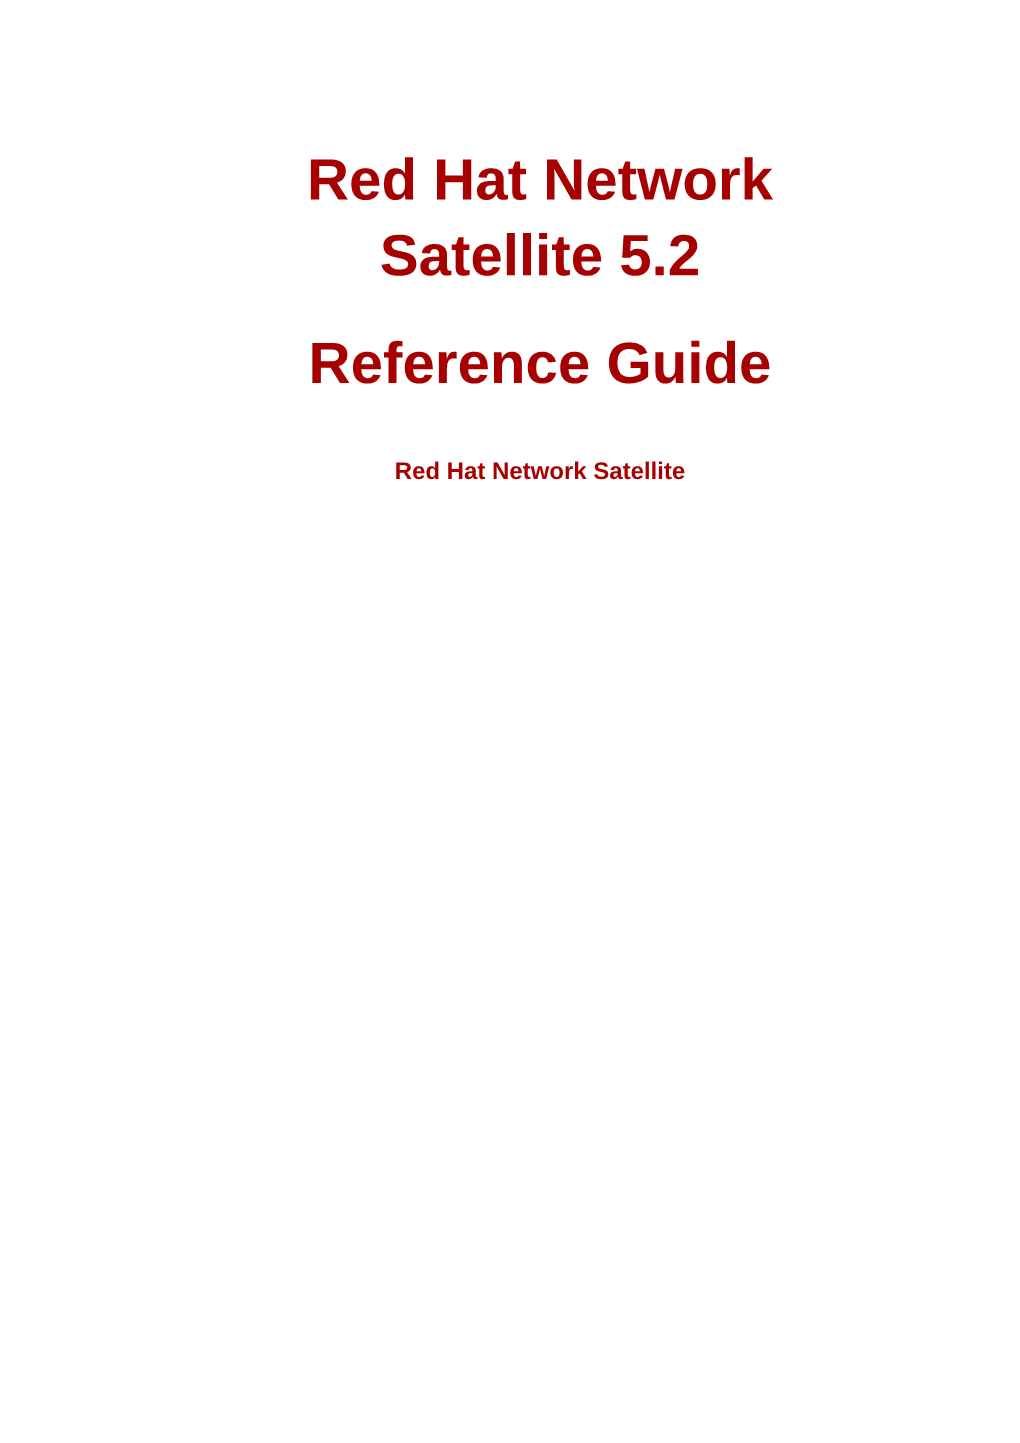 Red Hat Network Satellite 5.2 Reference Guide